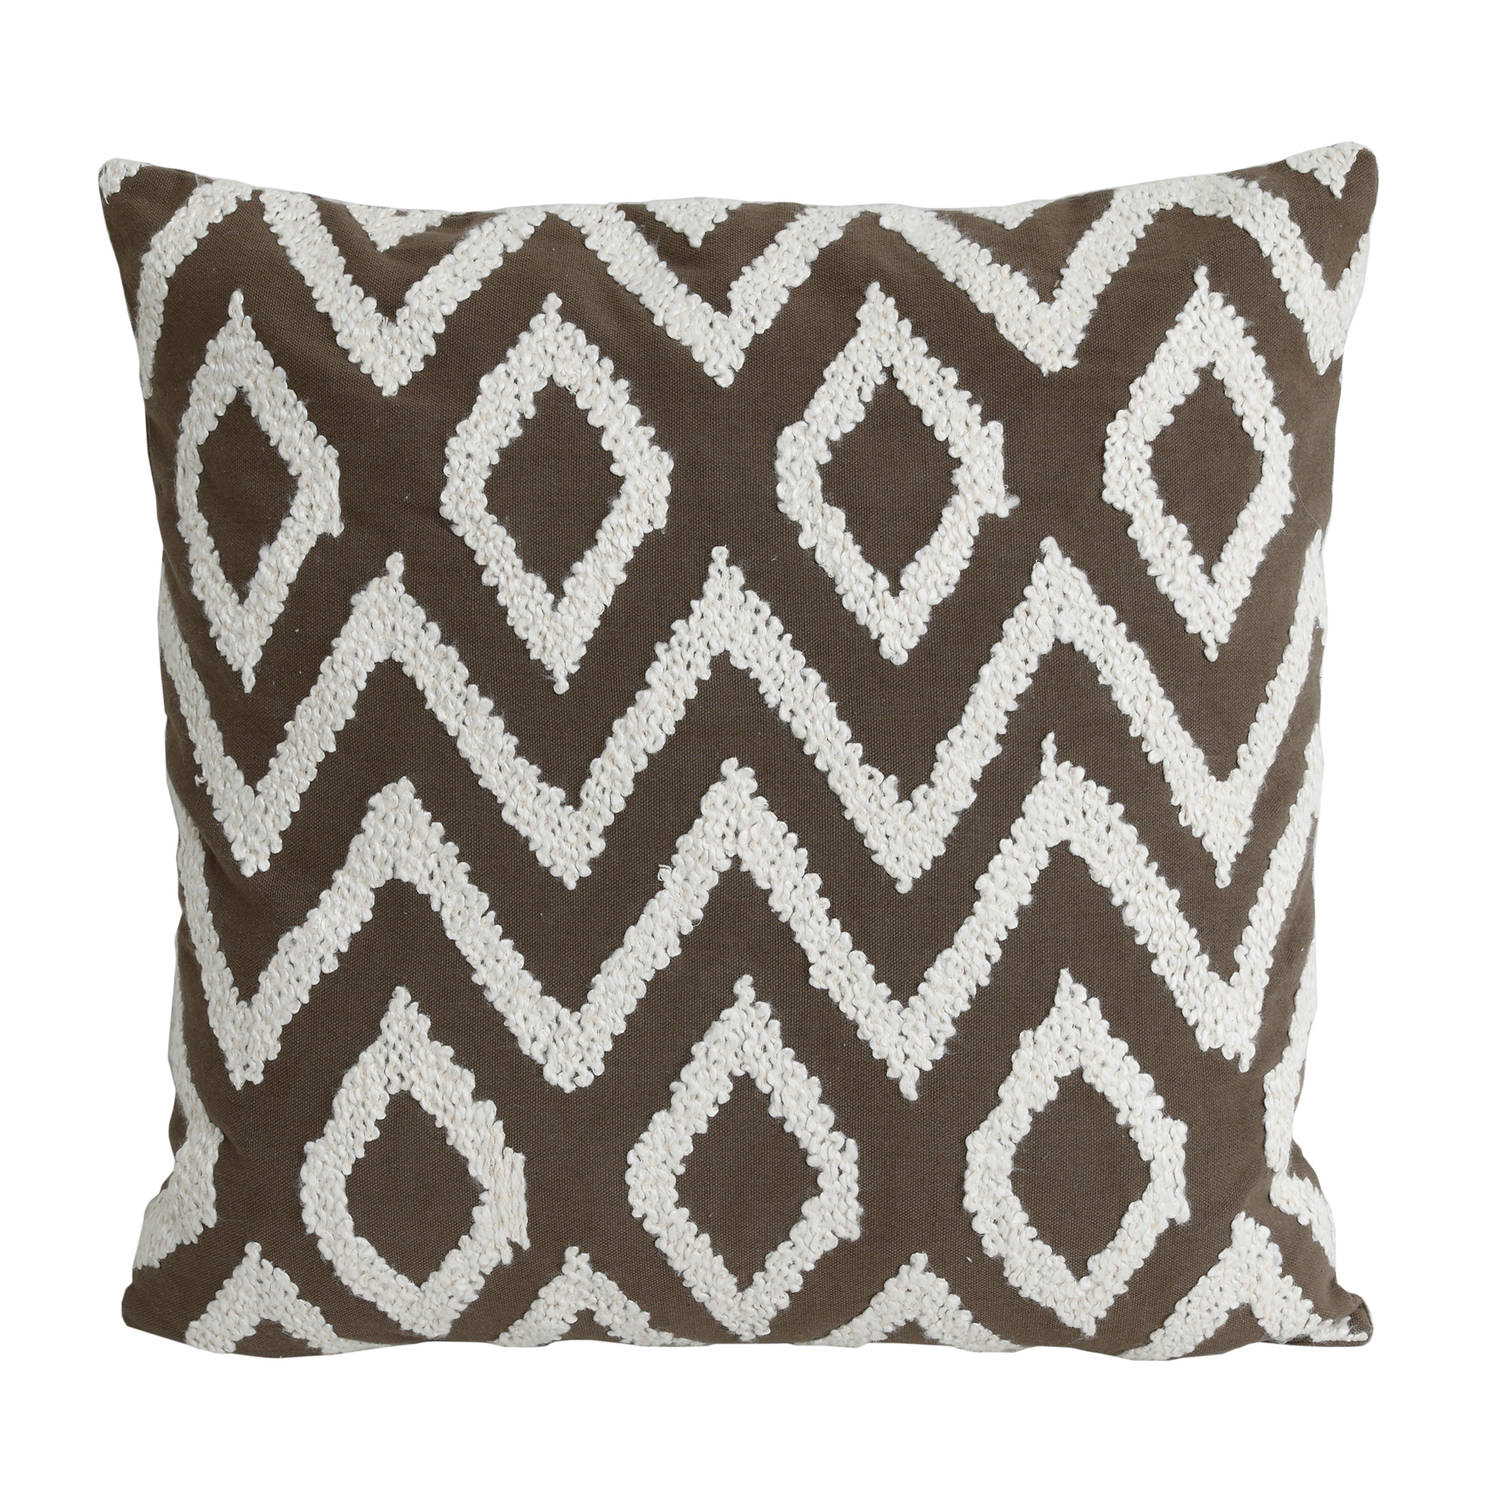 PTMD Cecile Taupe cotton cushion triangle pattern squar